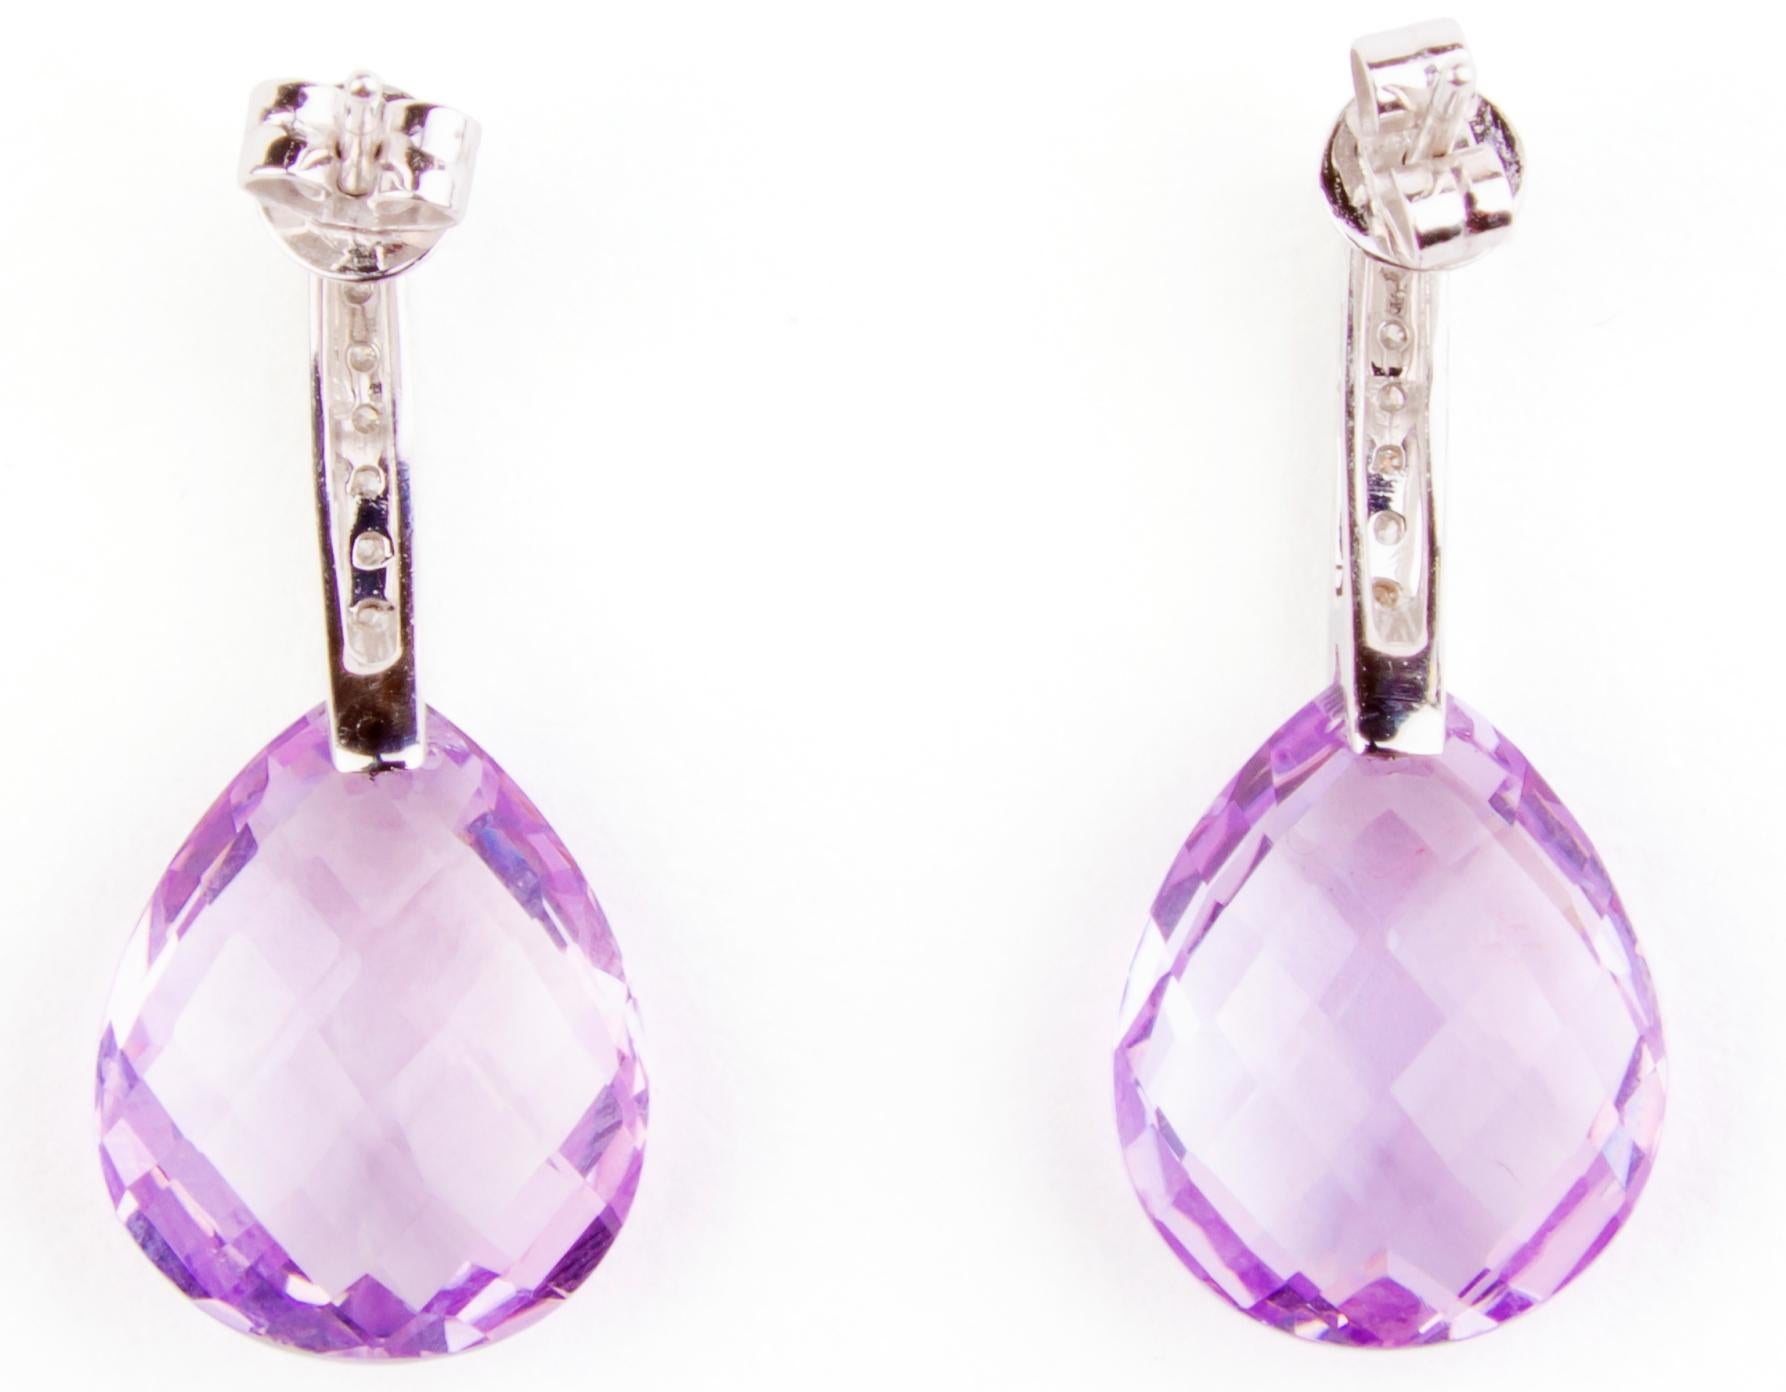 Contemporary 18 Karat White Gold Diamond and Amethyst Earrings For Sale